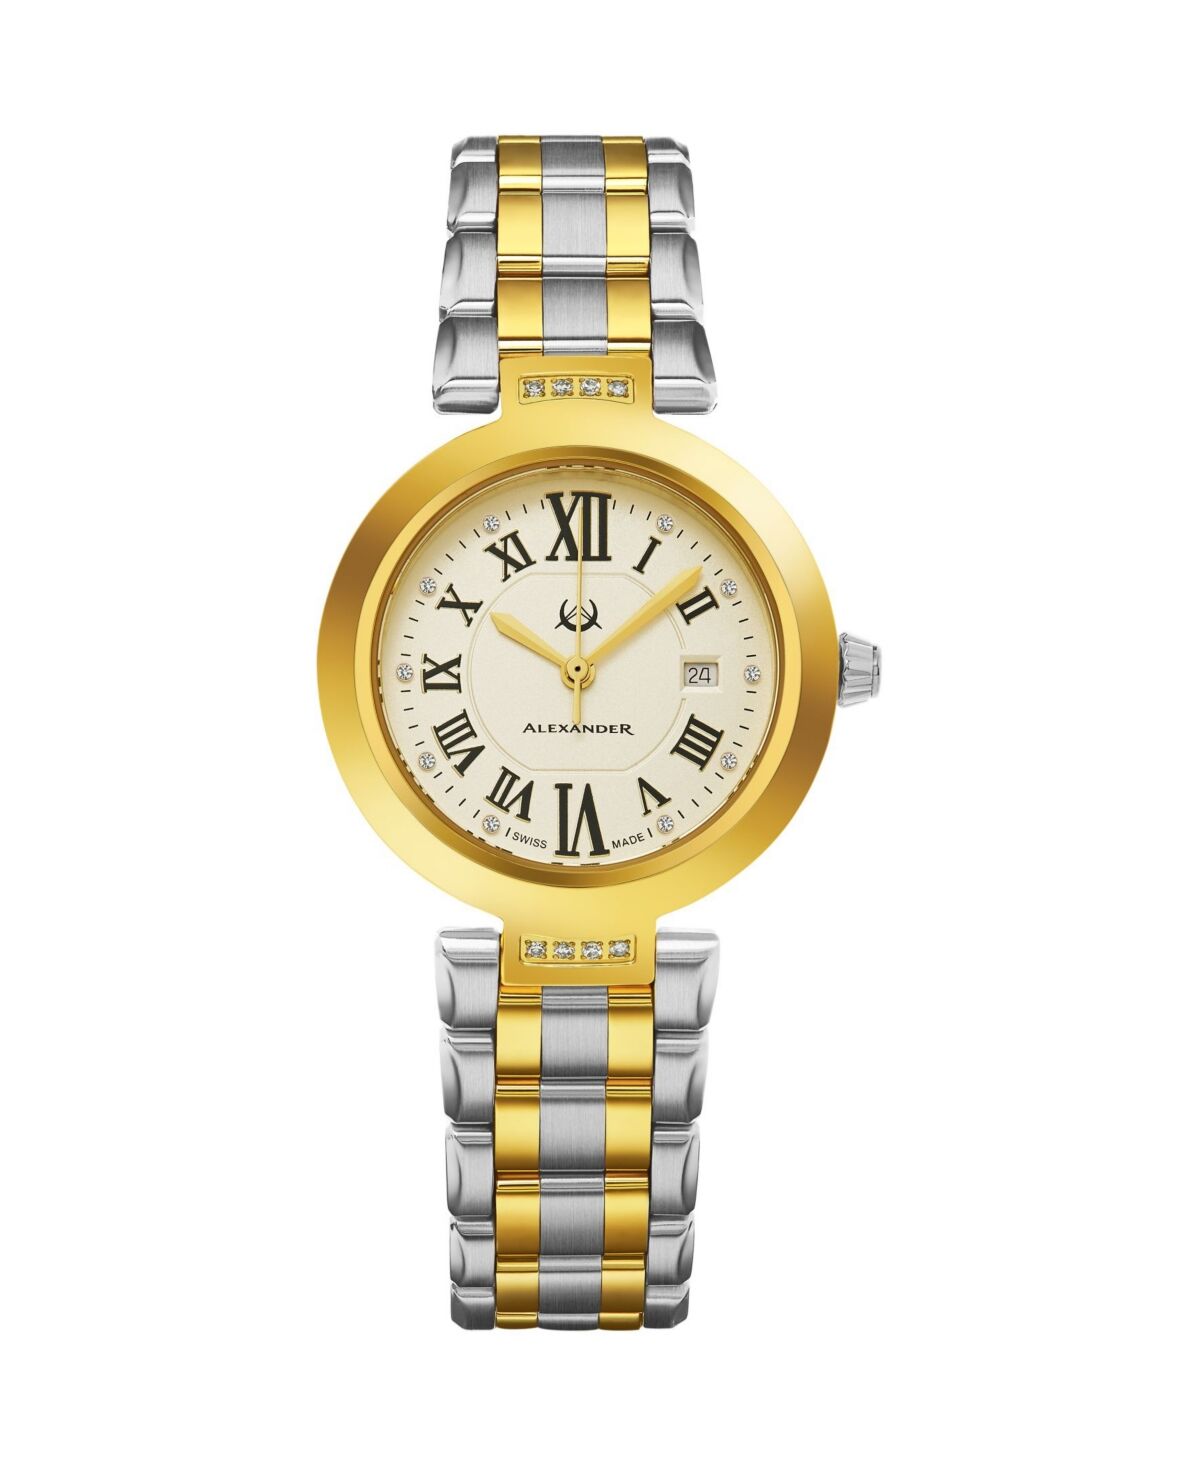 Stuhrling Alexander Watch AD203B-02, Ladies Quartz Date Watch with Yellow Gold Tone Stainless Steel Case on Yellow Gold Tone Stainless Steel Bracelet - Two-tone